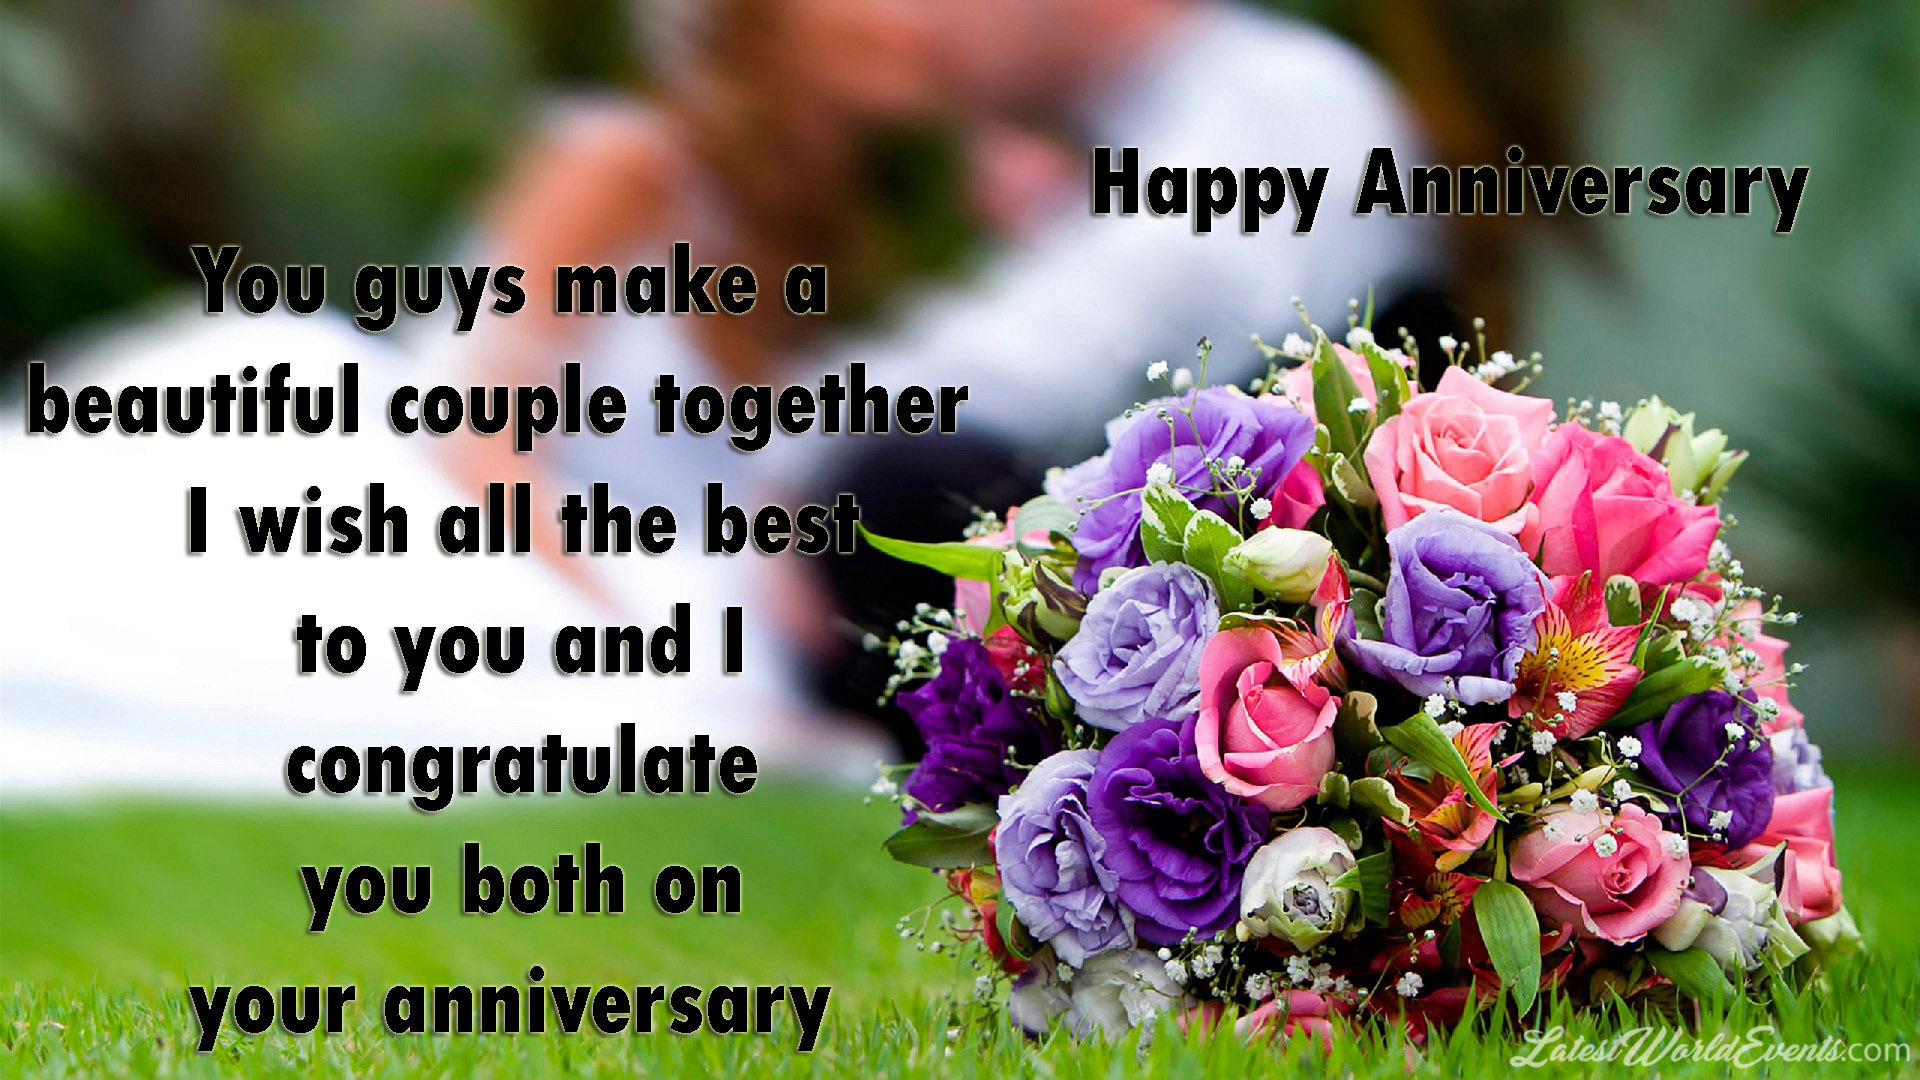 Marriage Anniversary Quotes & Wishes Downloads